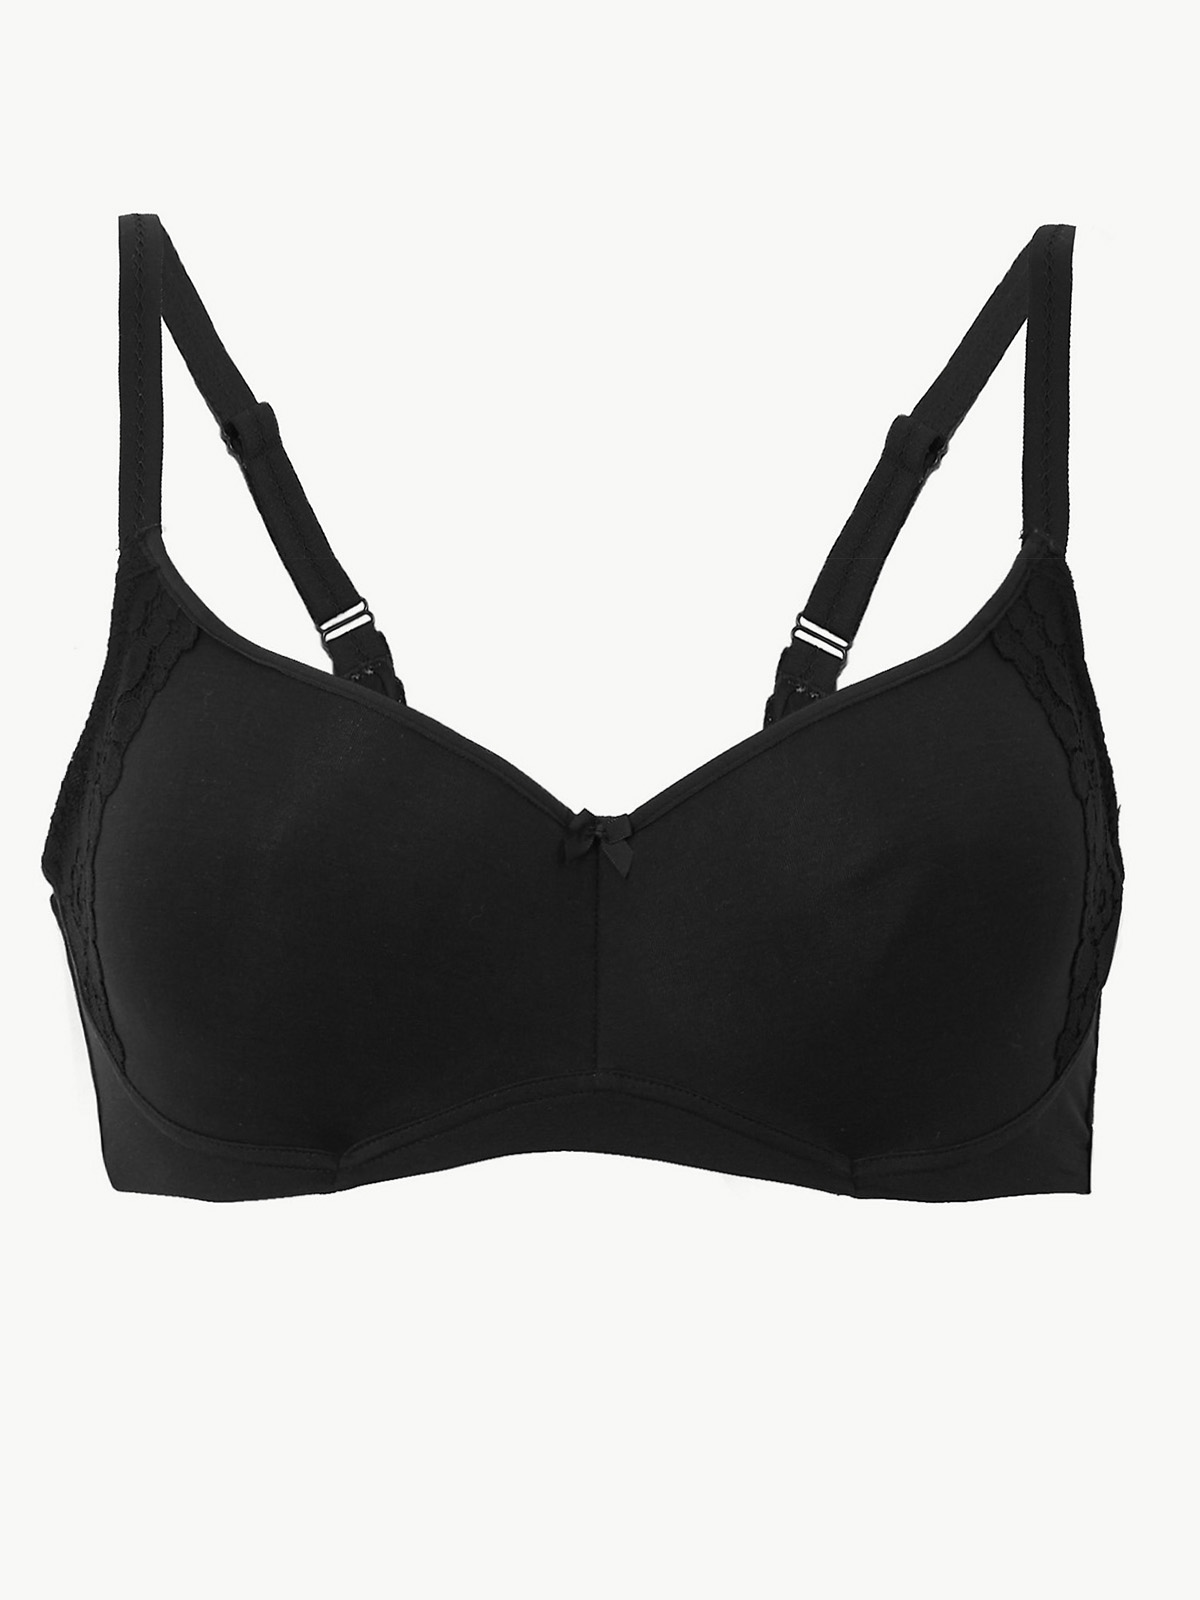  - - BLACK Cotton Rich Cool Comfort Smoothing Full Cup Bra - Size 34 to 42  (A-B-C